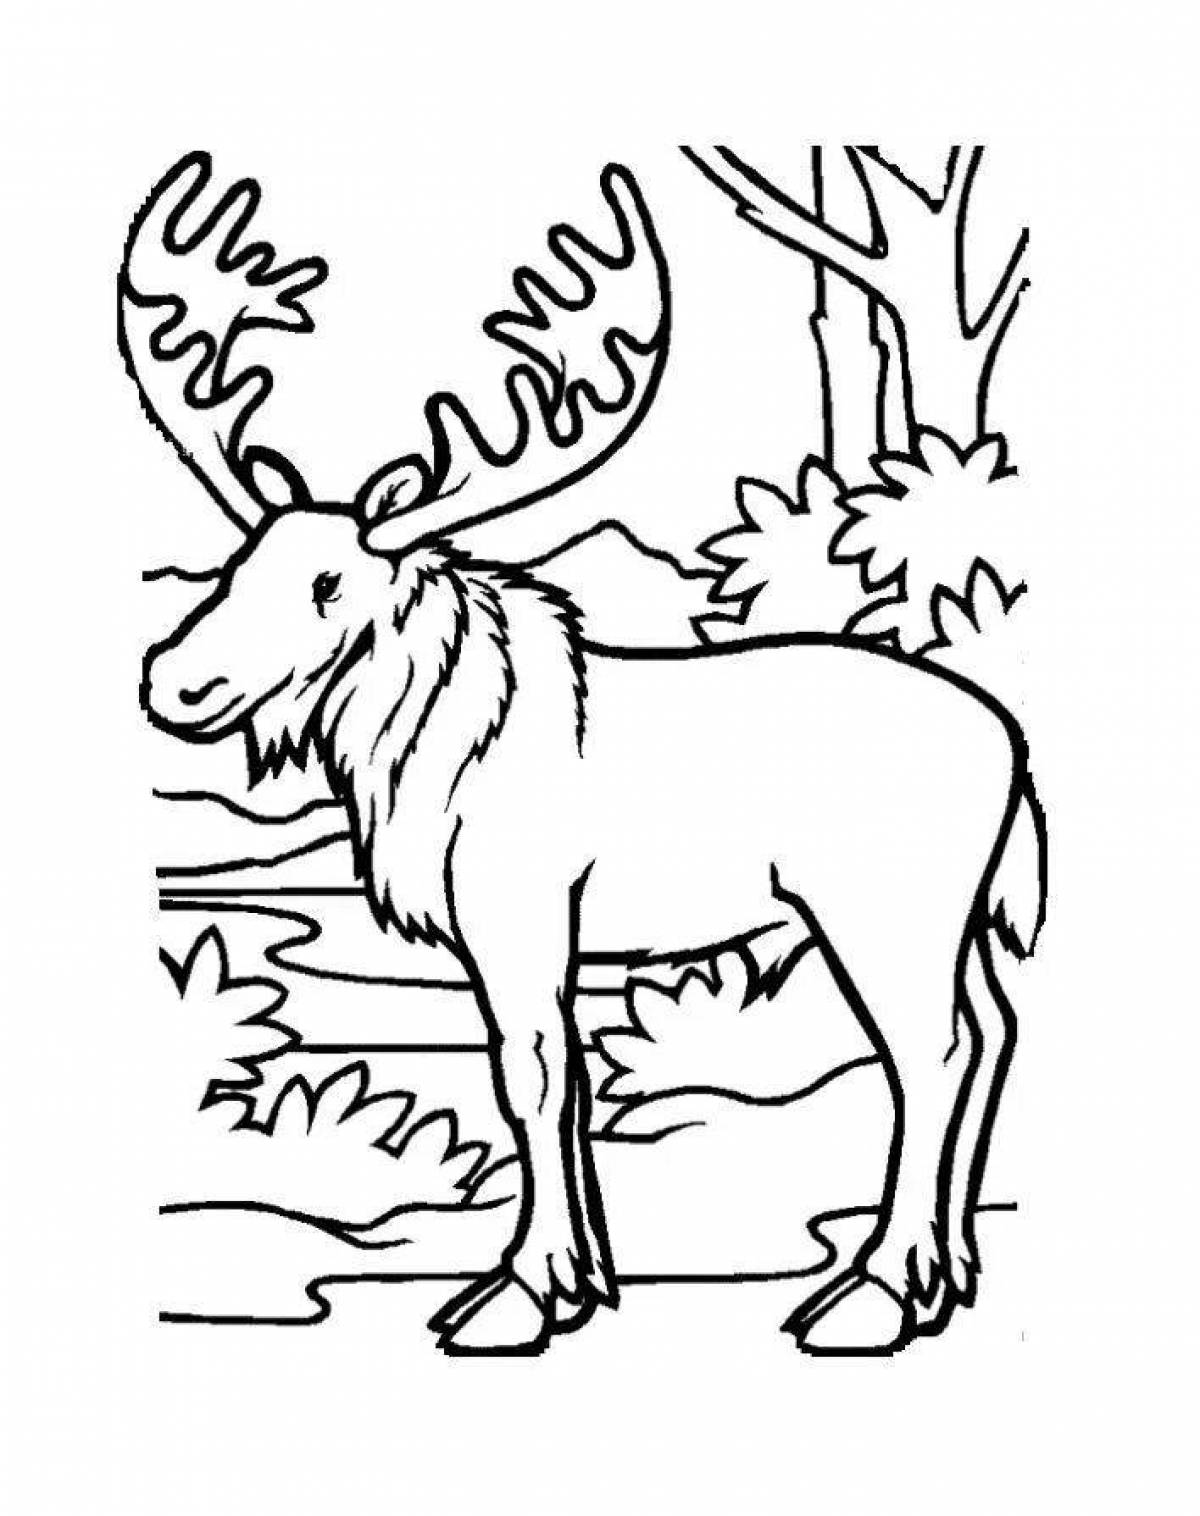 Funny forest animals coloring book